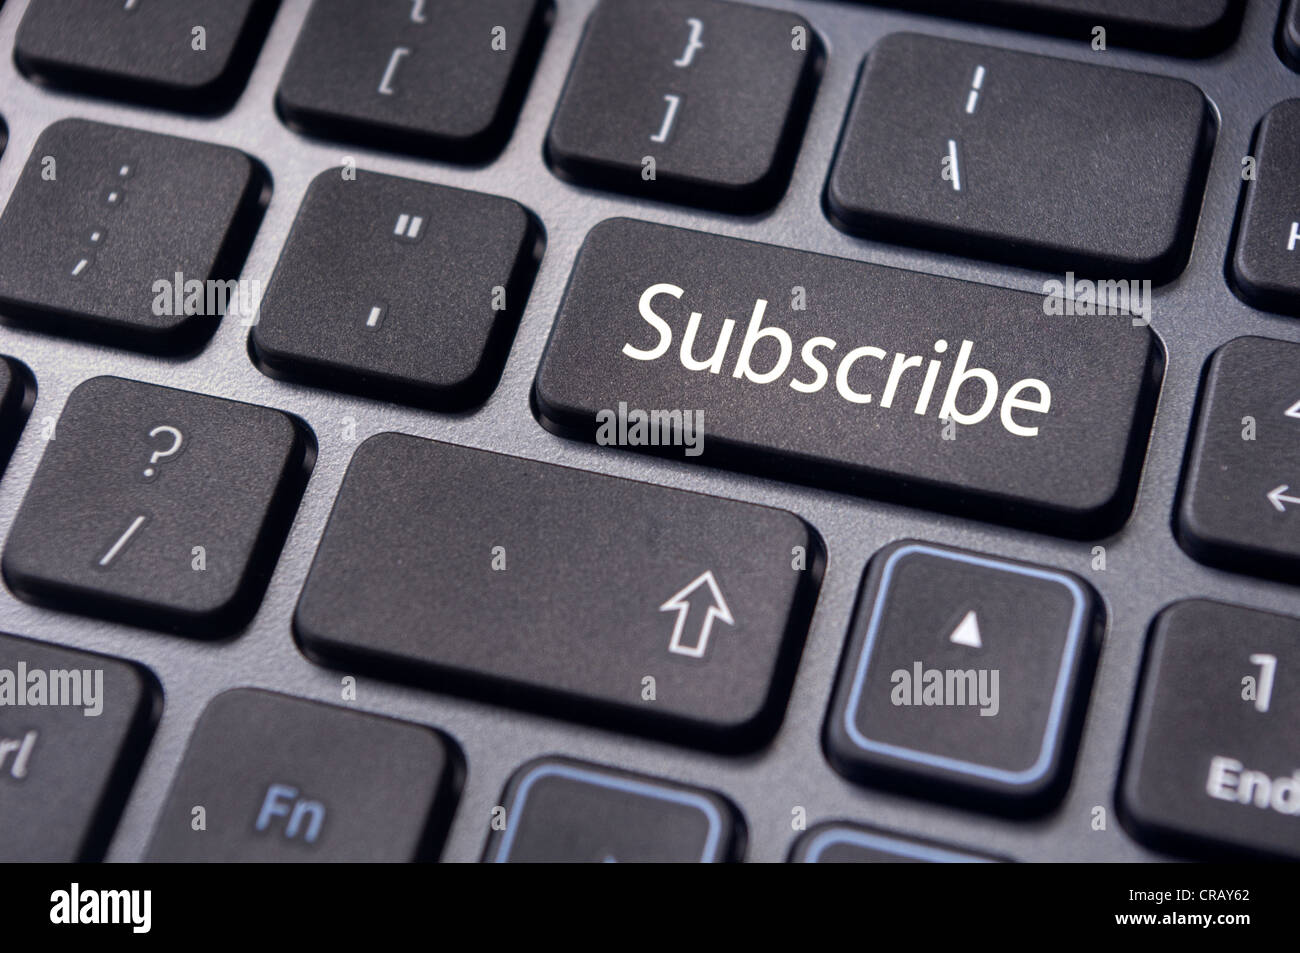 a subscribe message on keyboard enter key, for conceptual usage. Stock Photo